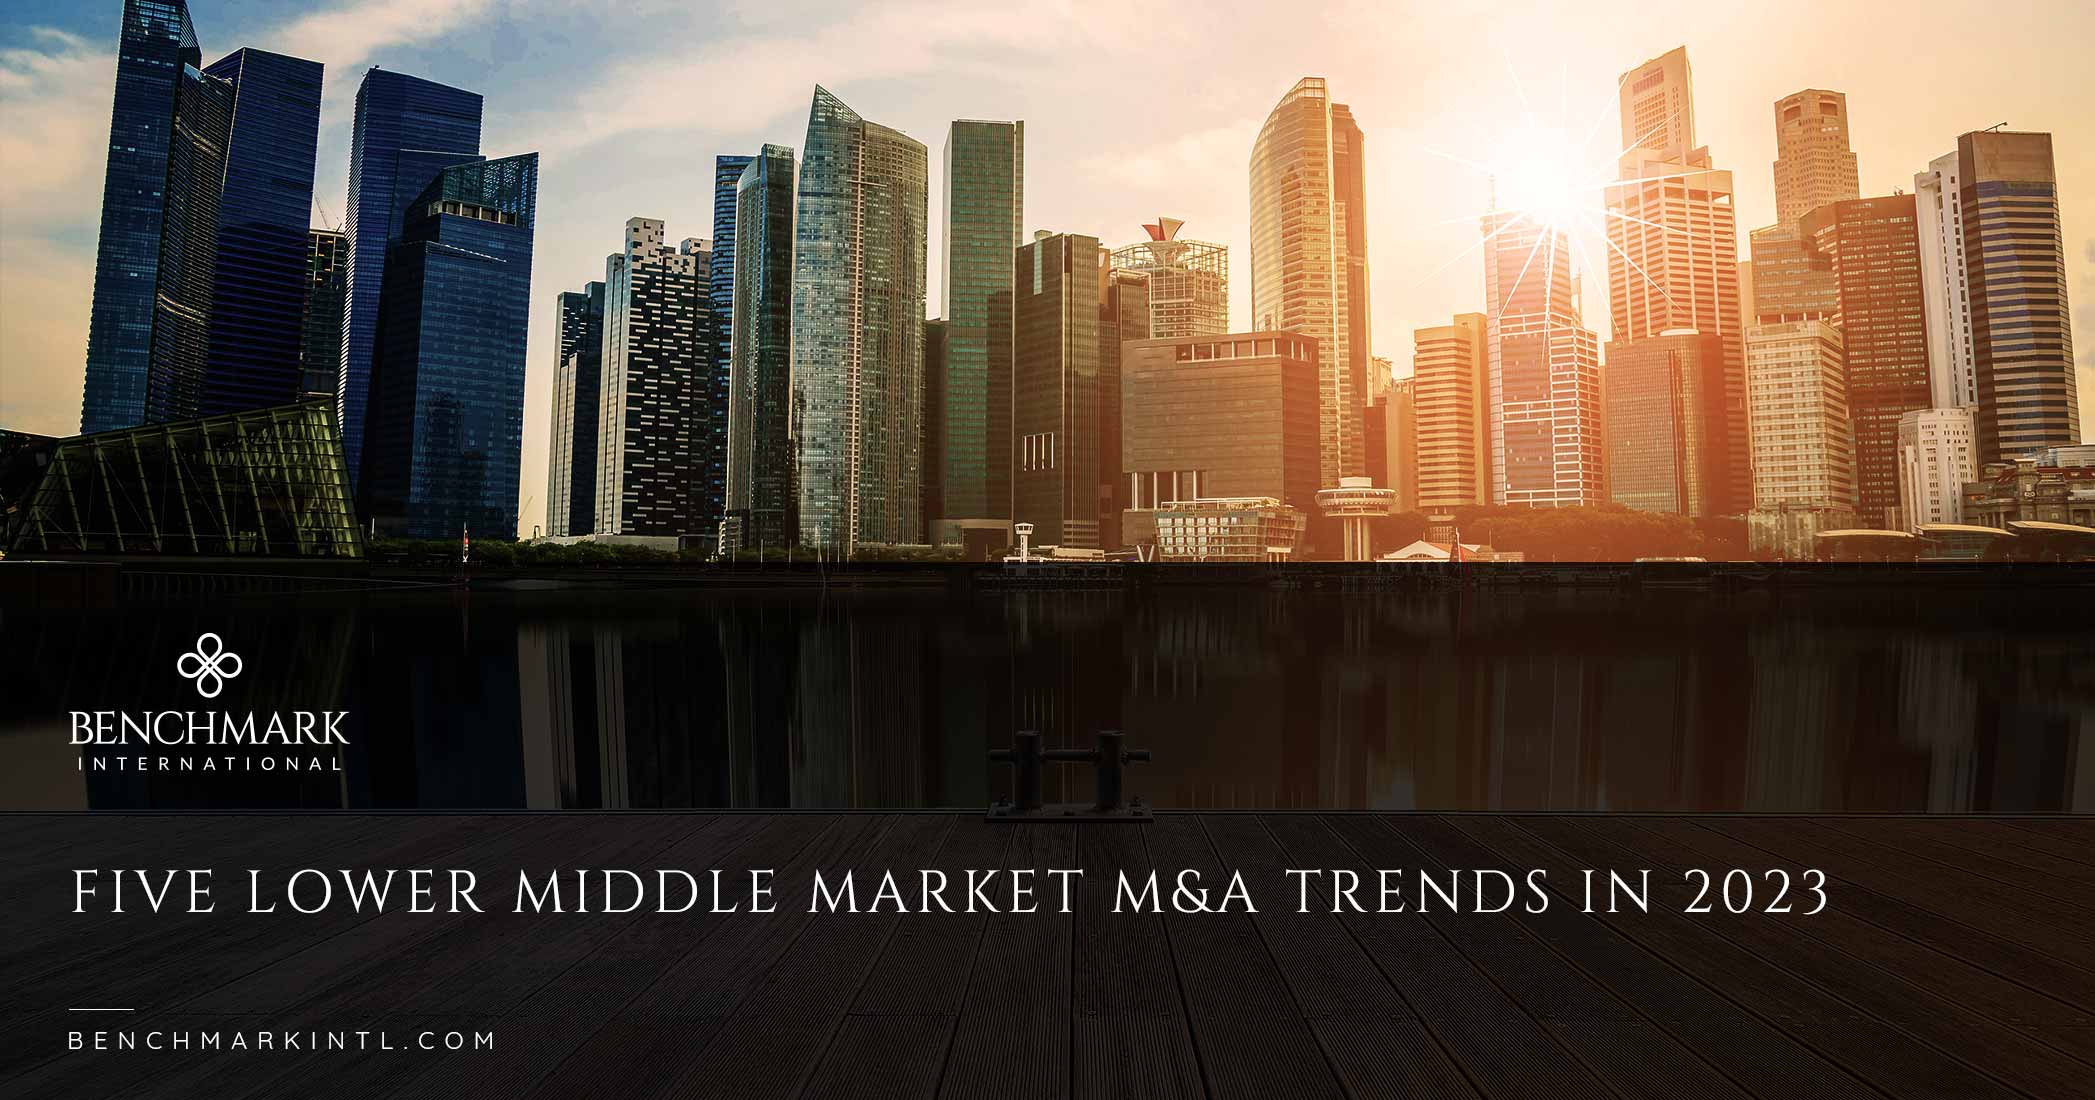 Five Lower Middle Market M&A Trends In 2023